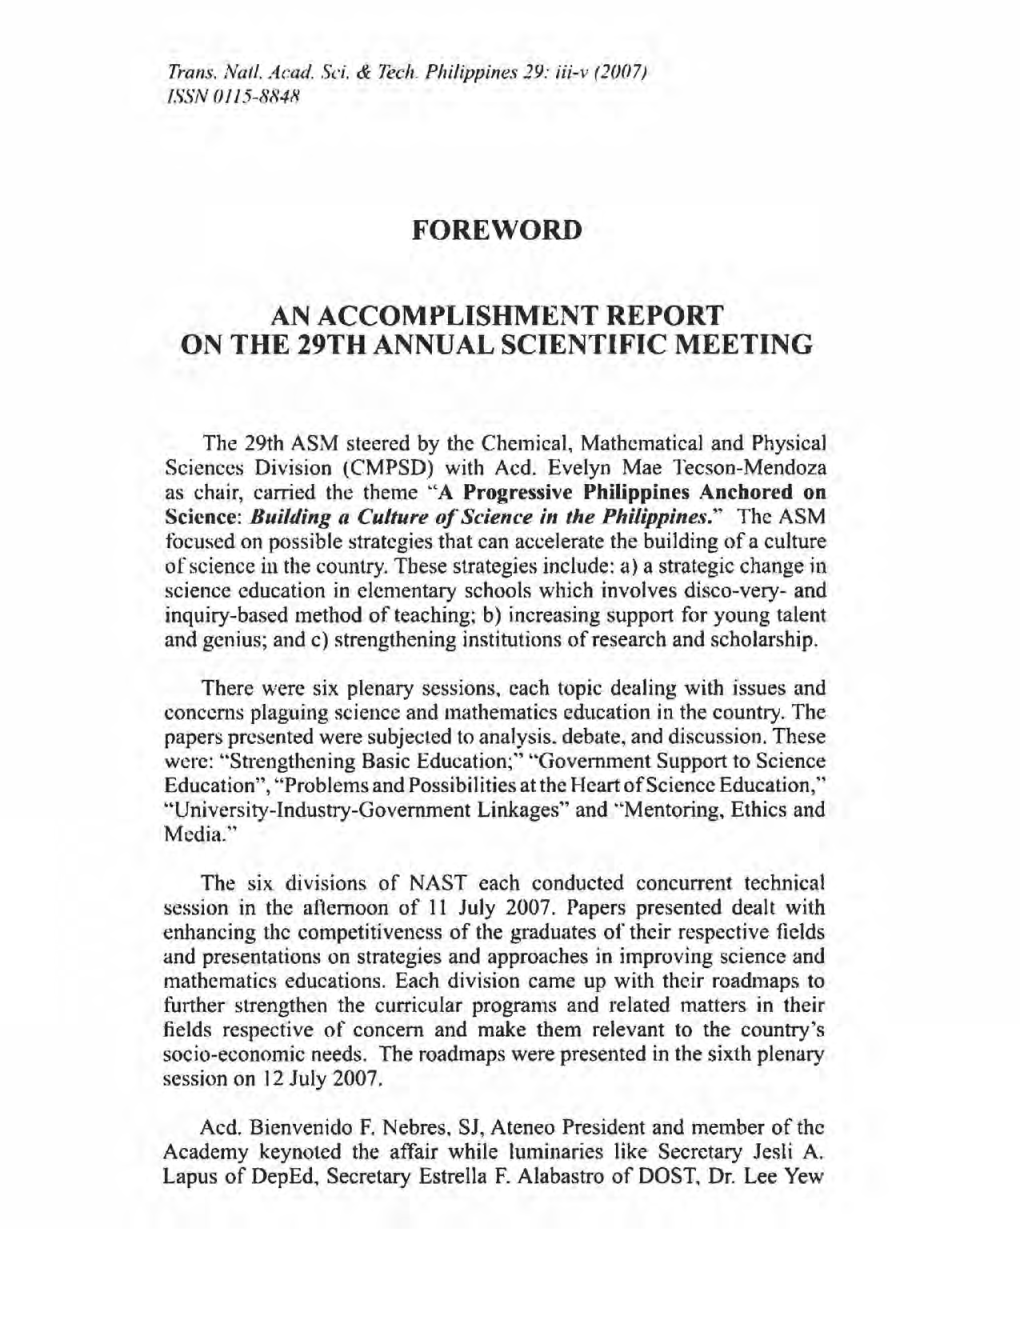 Foreword an Accomplishment Report on the 29Th Annual Scientific Meeting